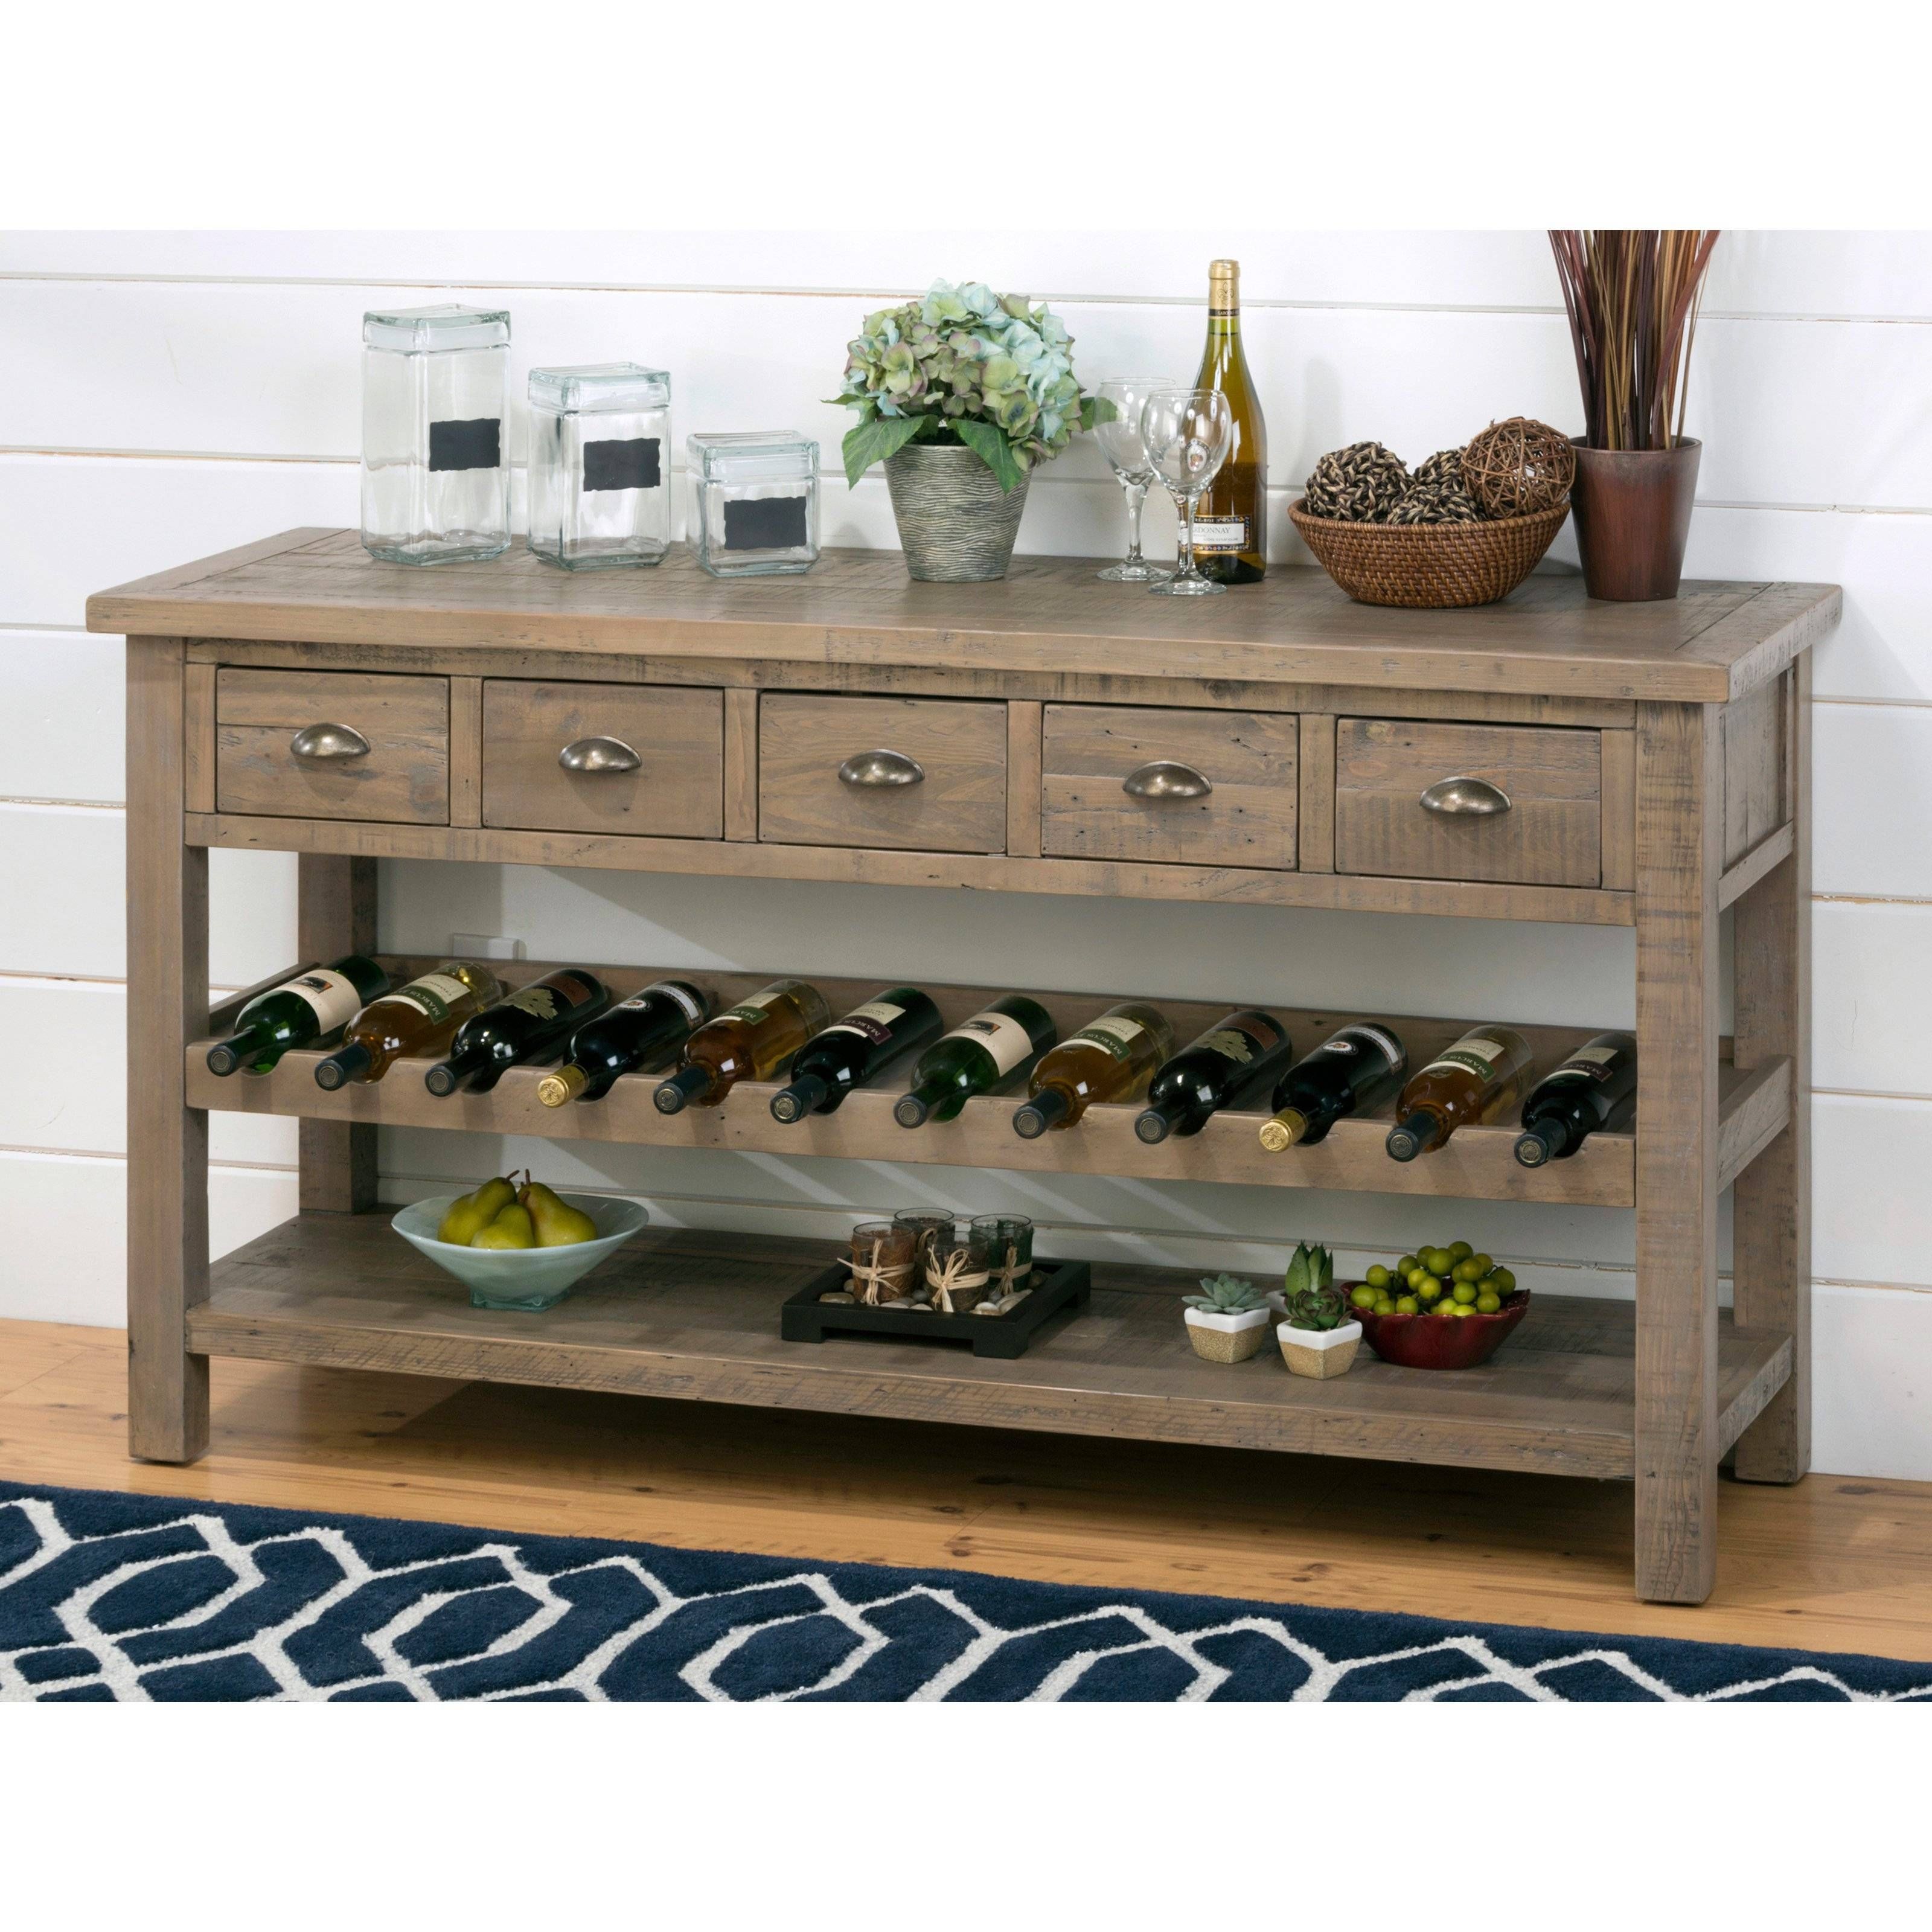 Elegant Sideboard With Wine Rack – Bjdgjy With Sideboards With Wine Rack (View 4 of 15)